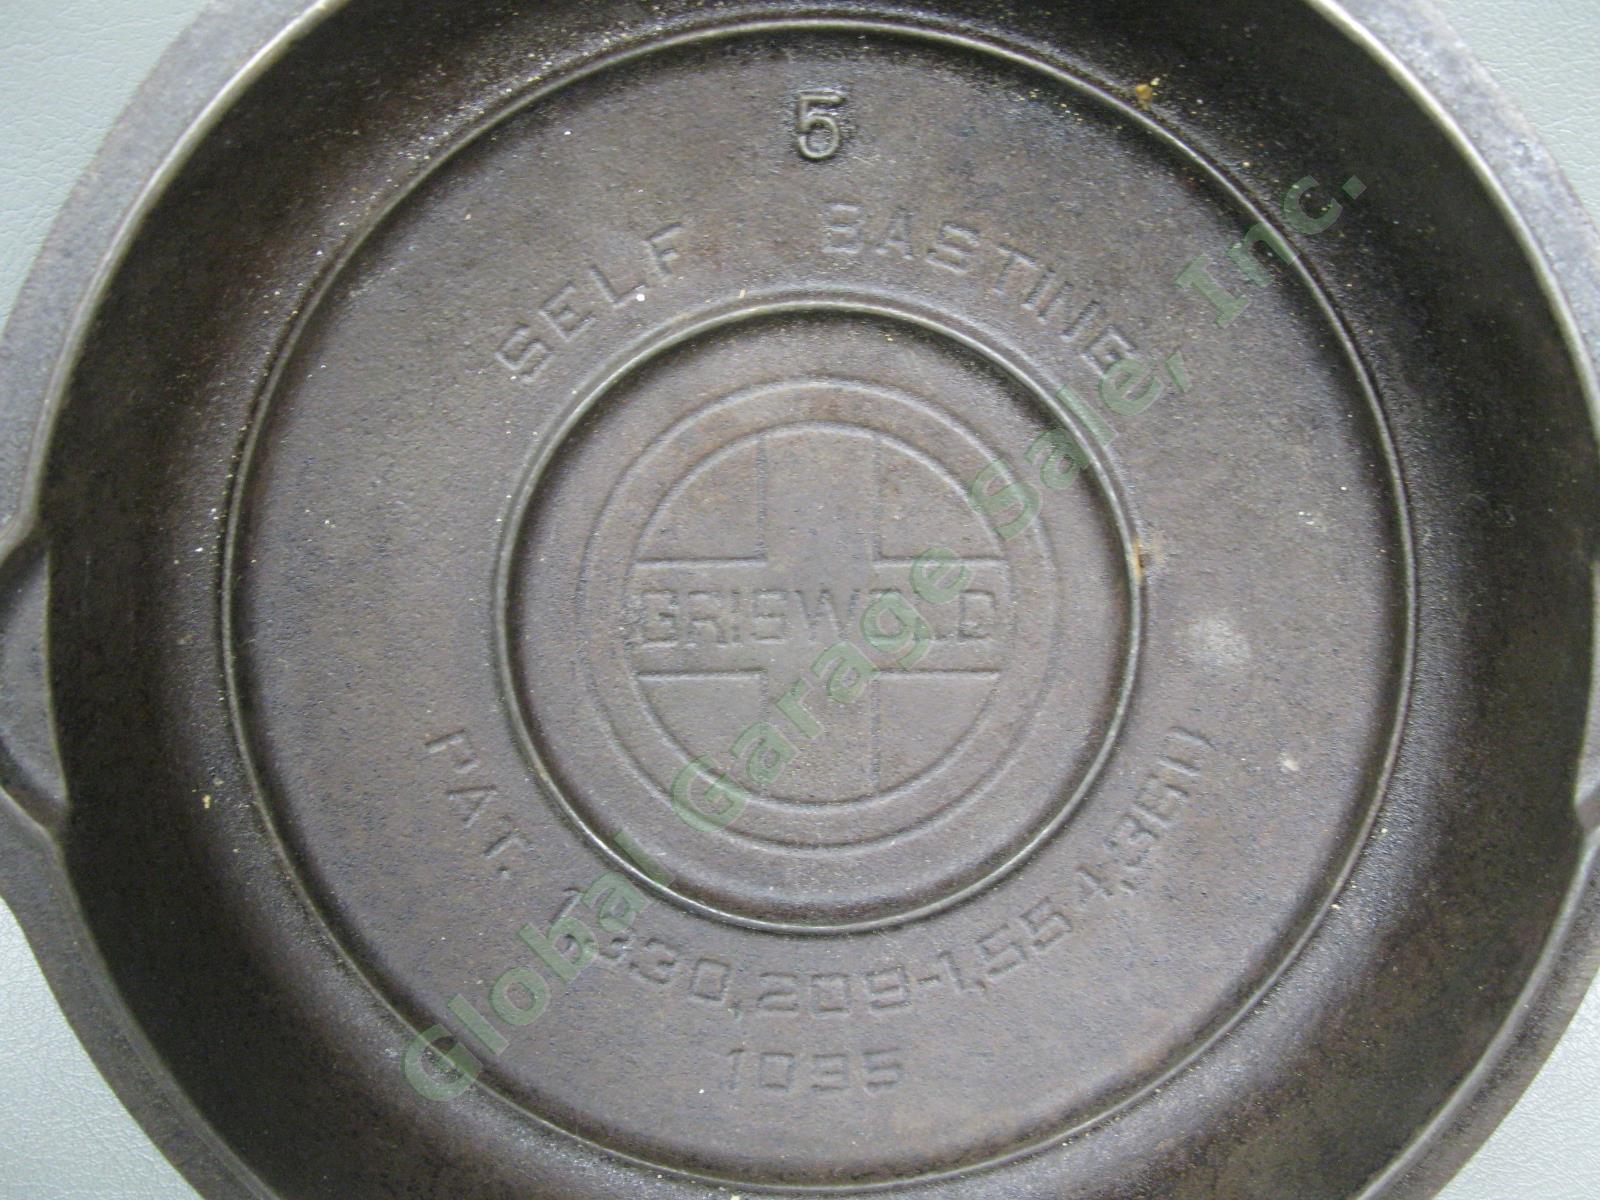 Vintage Griswold No-5 1095 Cast Iron Self-Basting Dutch Oven Lid Cover Cookware 2